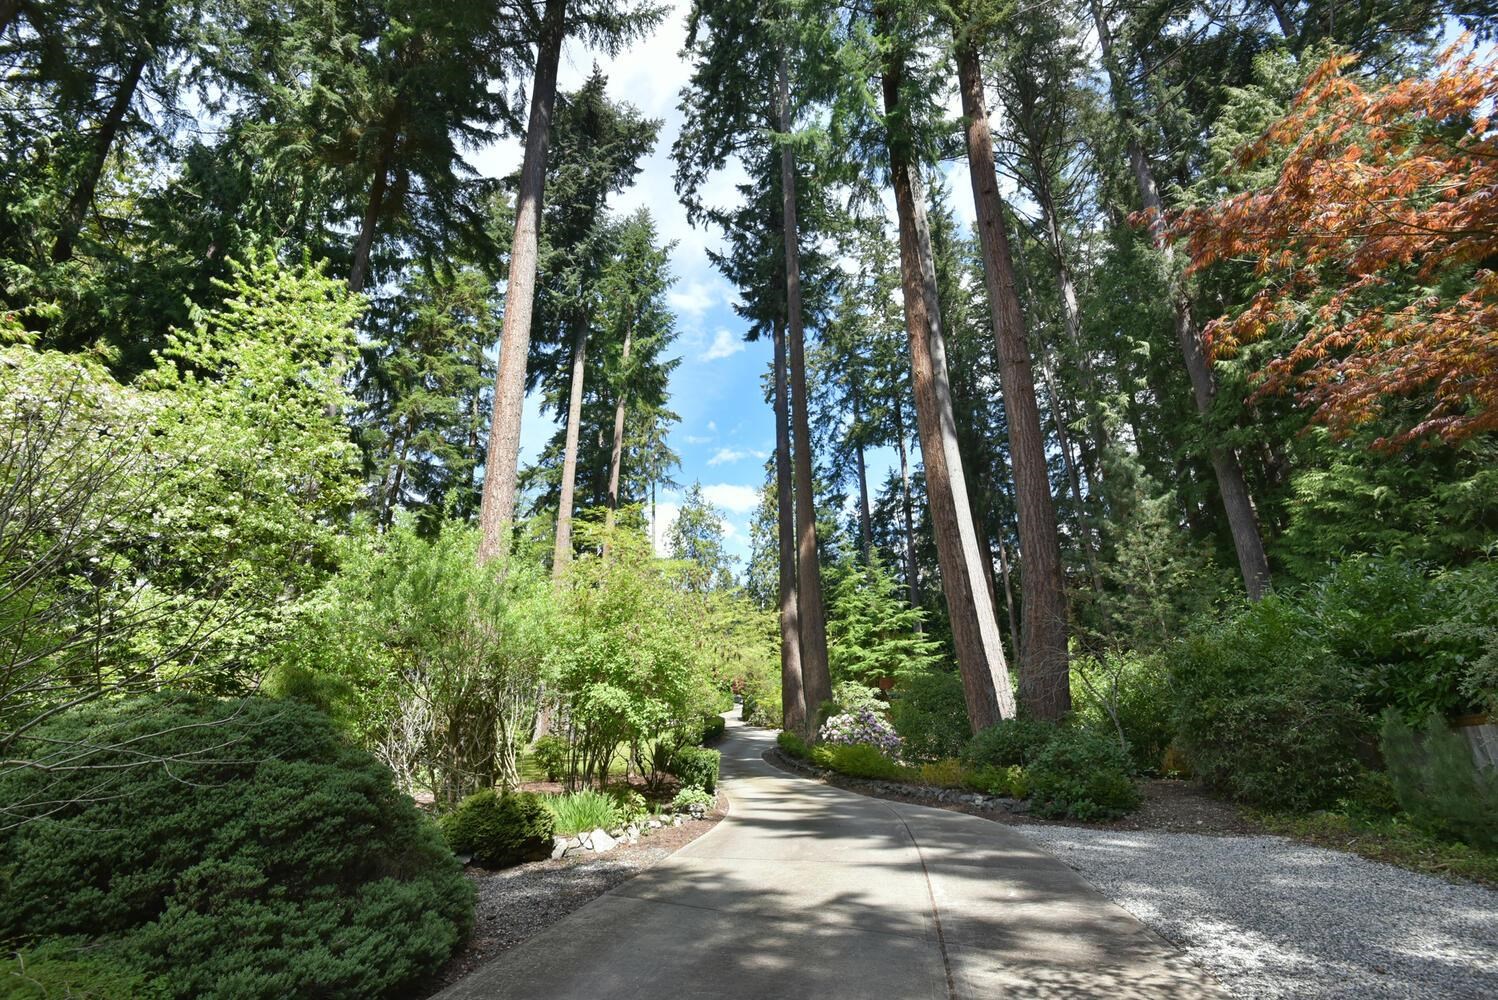 Lovely private driveway access, manicured gardens, tall trees and gated, secured access.